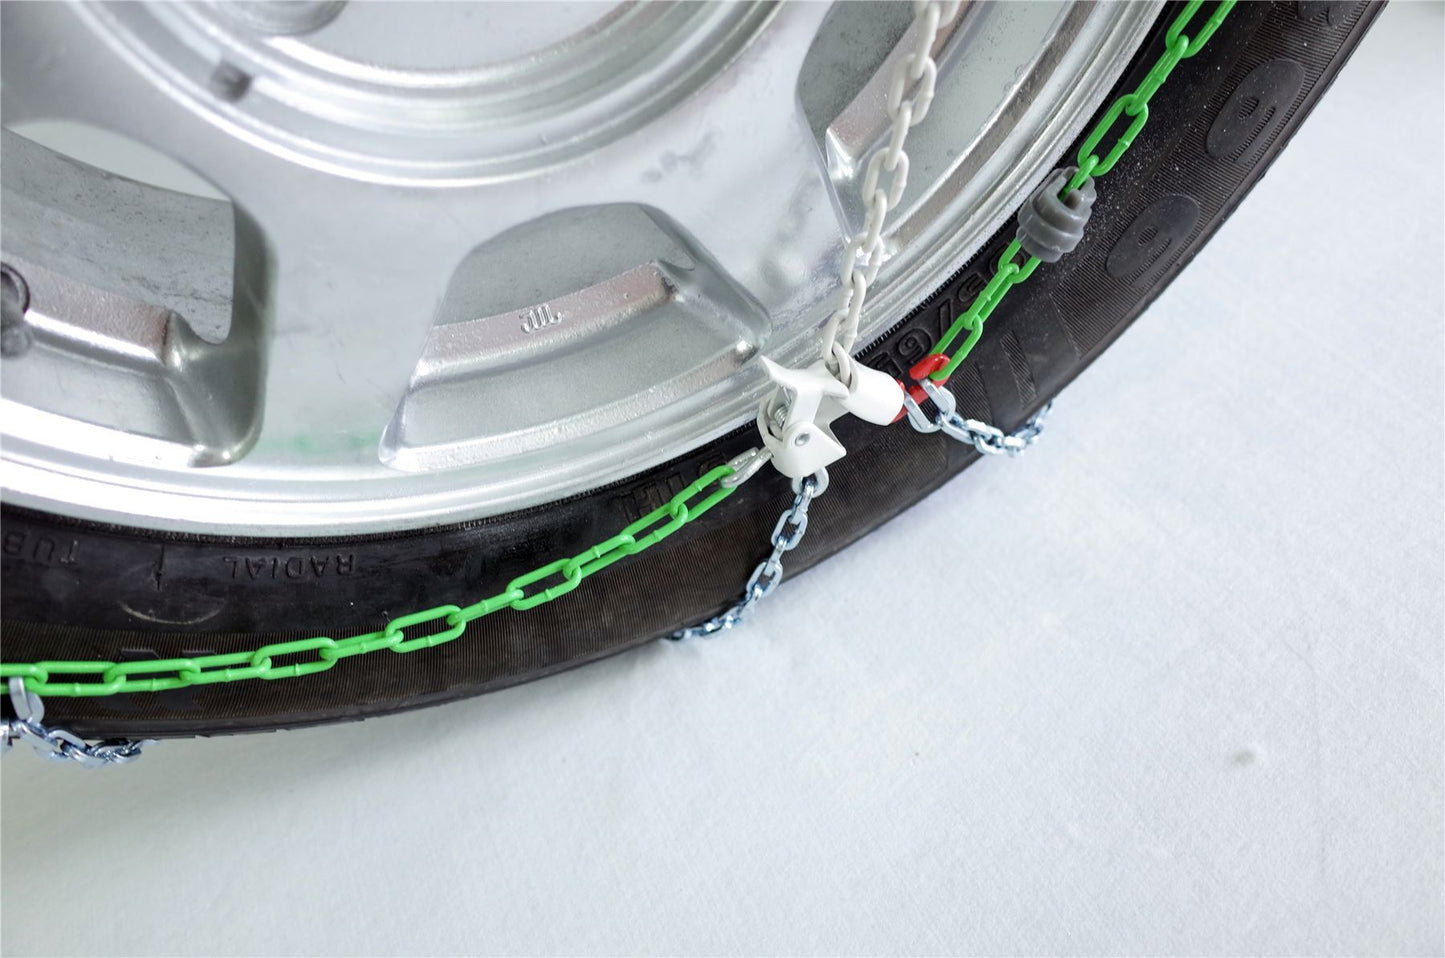 Green Valley TXR9 Winter 9mm Snow Chains - Car Tyre for 12" Wheels 155-12